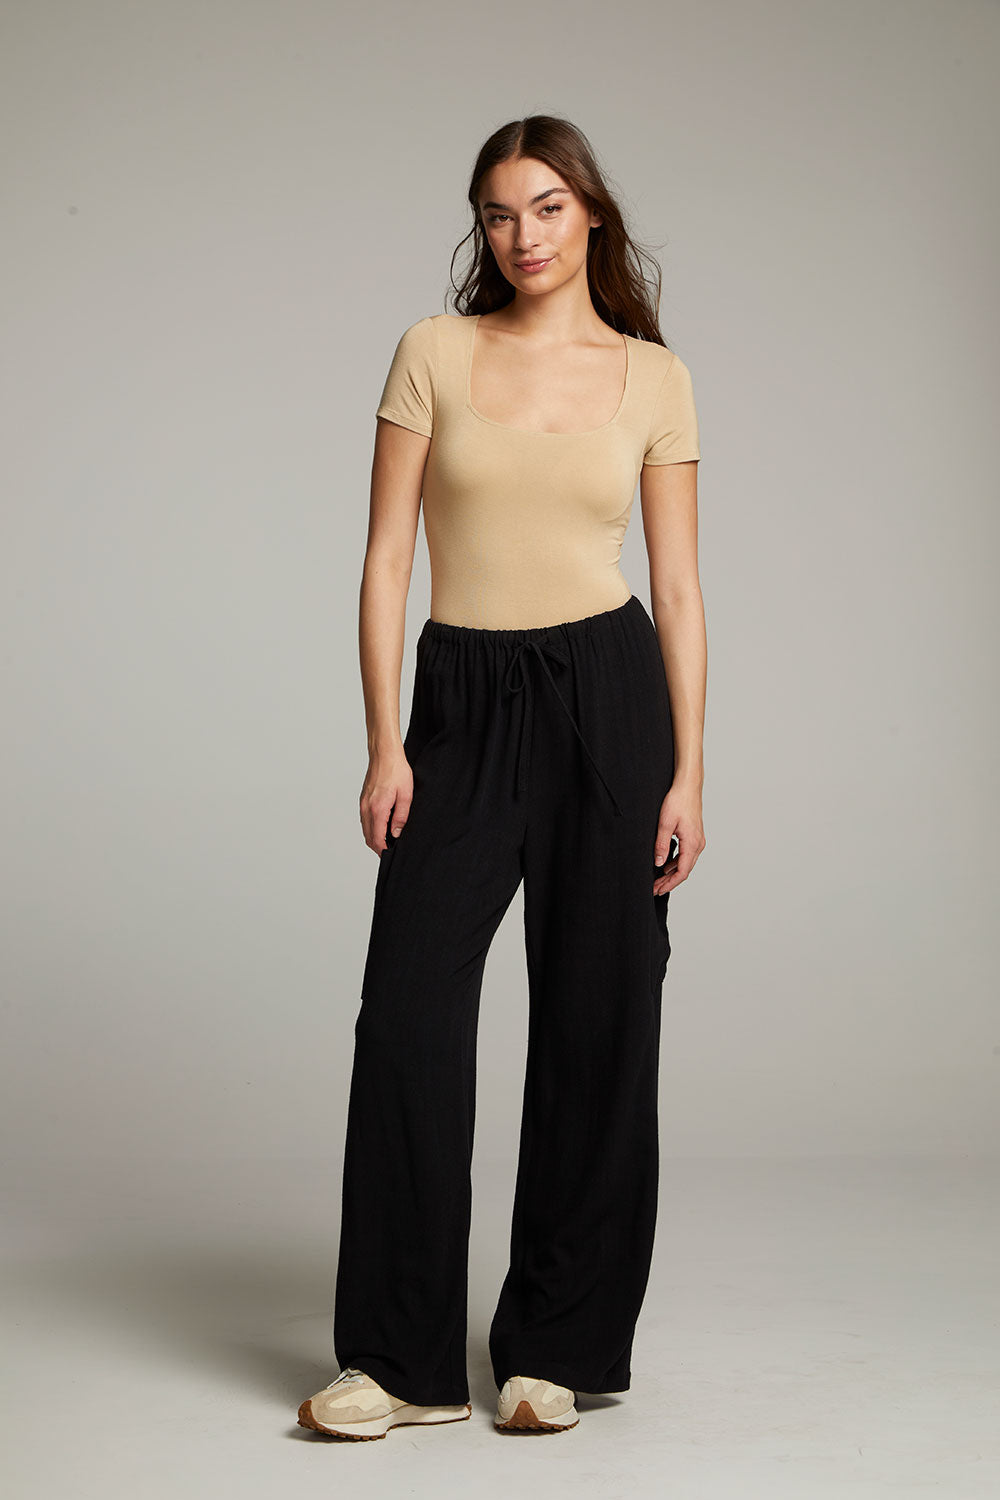 River Cappuccino Bodysuit WOMENS chaserbrand